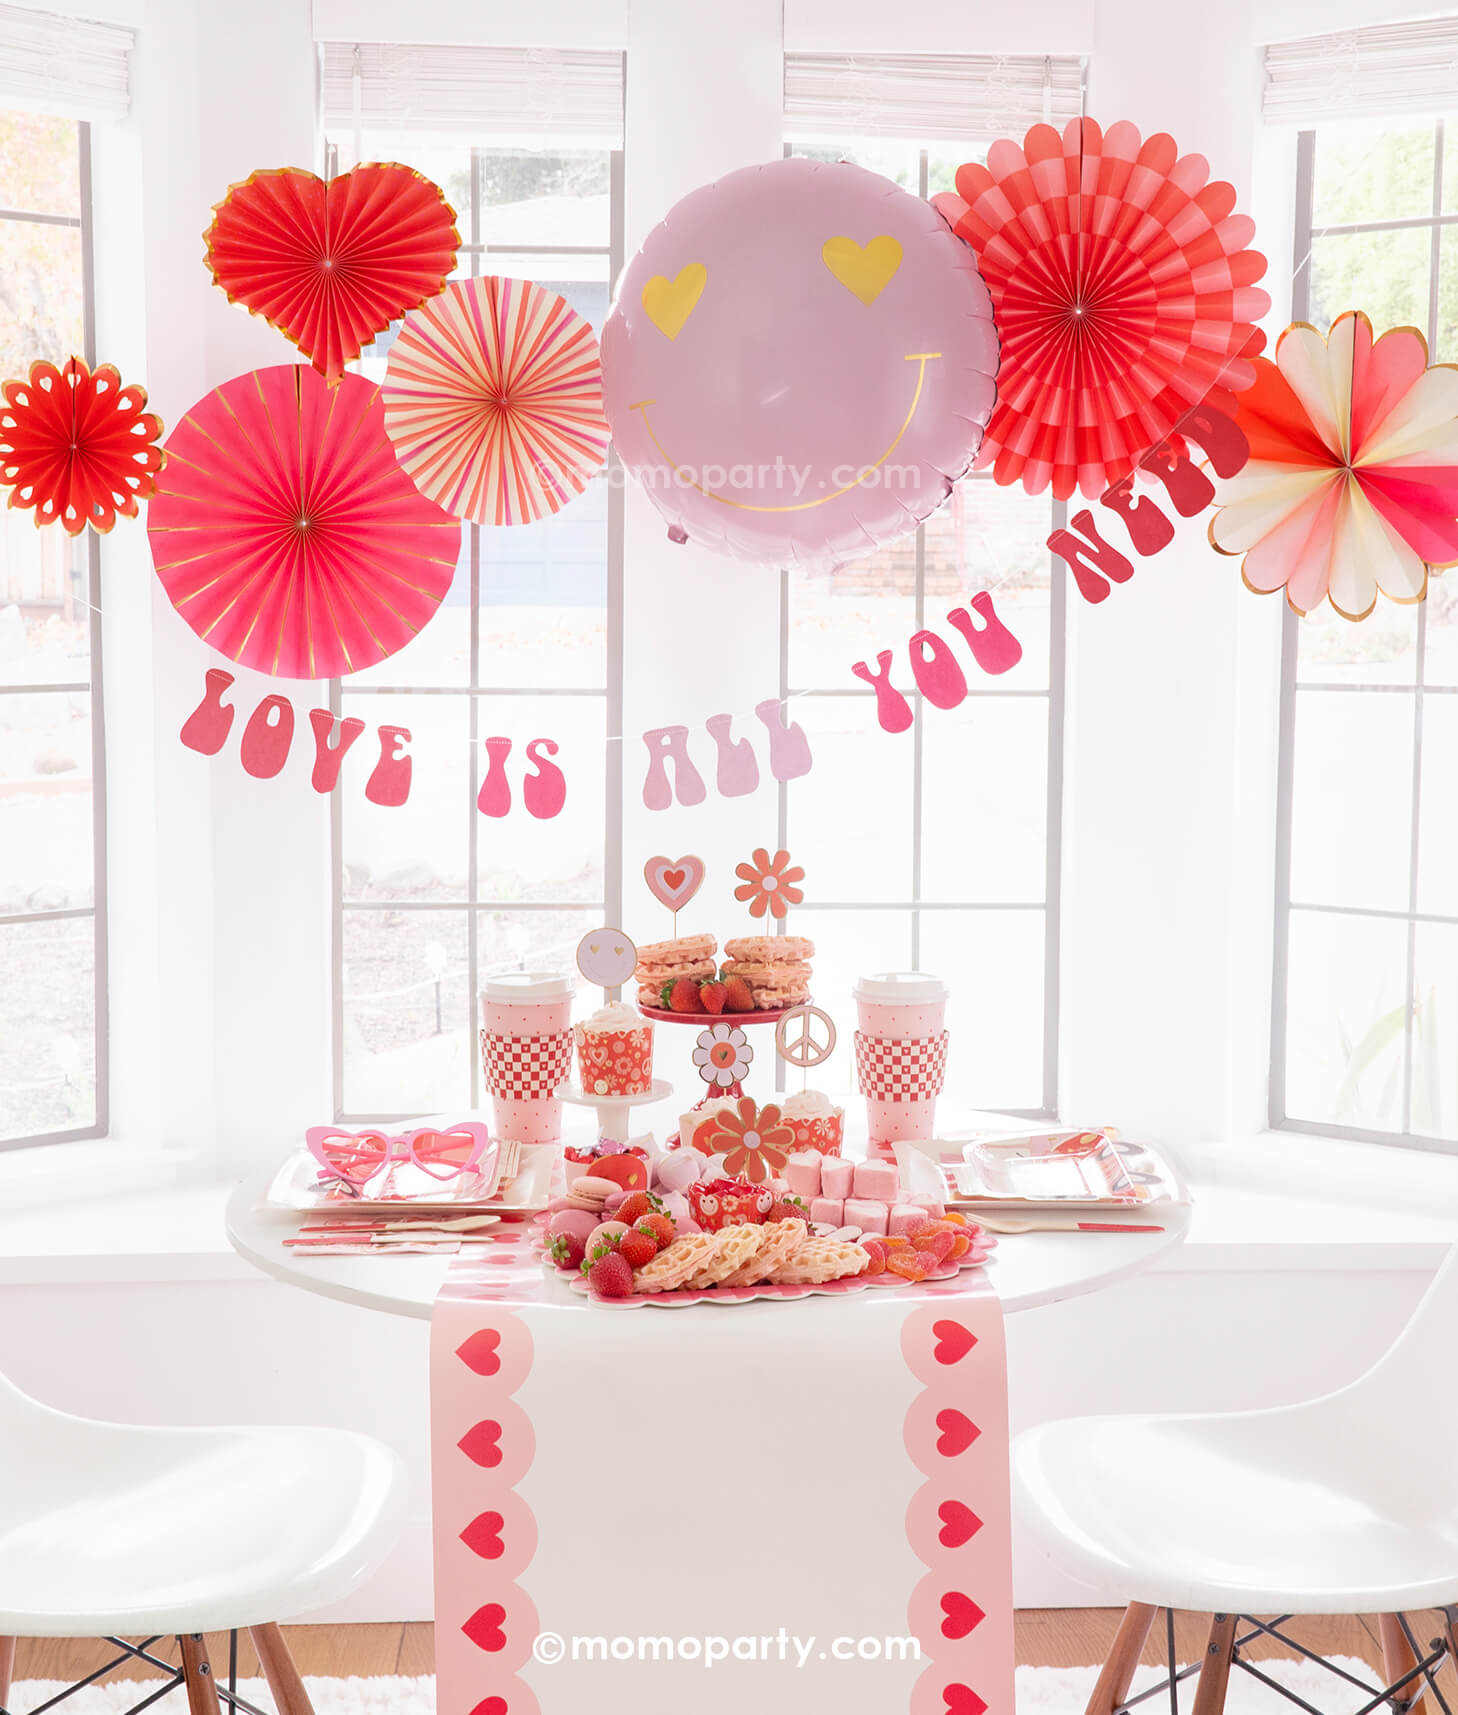 Momo Party presents the Groovy Valentine's Day Party Box, capturing a vintage vibe of love and peace with a groovy touch. This comprehensive kit includes My Mind's Eye Square Love Paper Plates, Luv Bus Paper Plates, All You Need is Love Napkins, Red Checks To-go Party Cups, Love Baking Cups With Toppers, Pink Heart Border Paper Table Runner, Heart You Paper Fan Set, Love Is All You Need Banner, and a Heart Eyes Love Foil Balloon. Perfect for throwing the ultimate Valentine's Day party